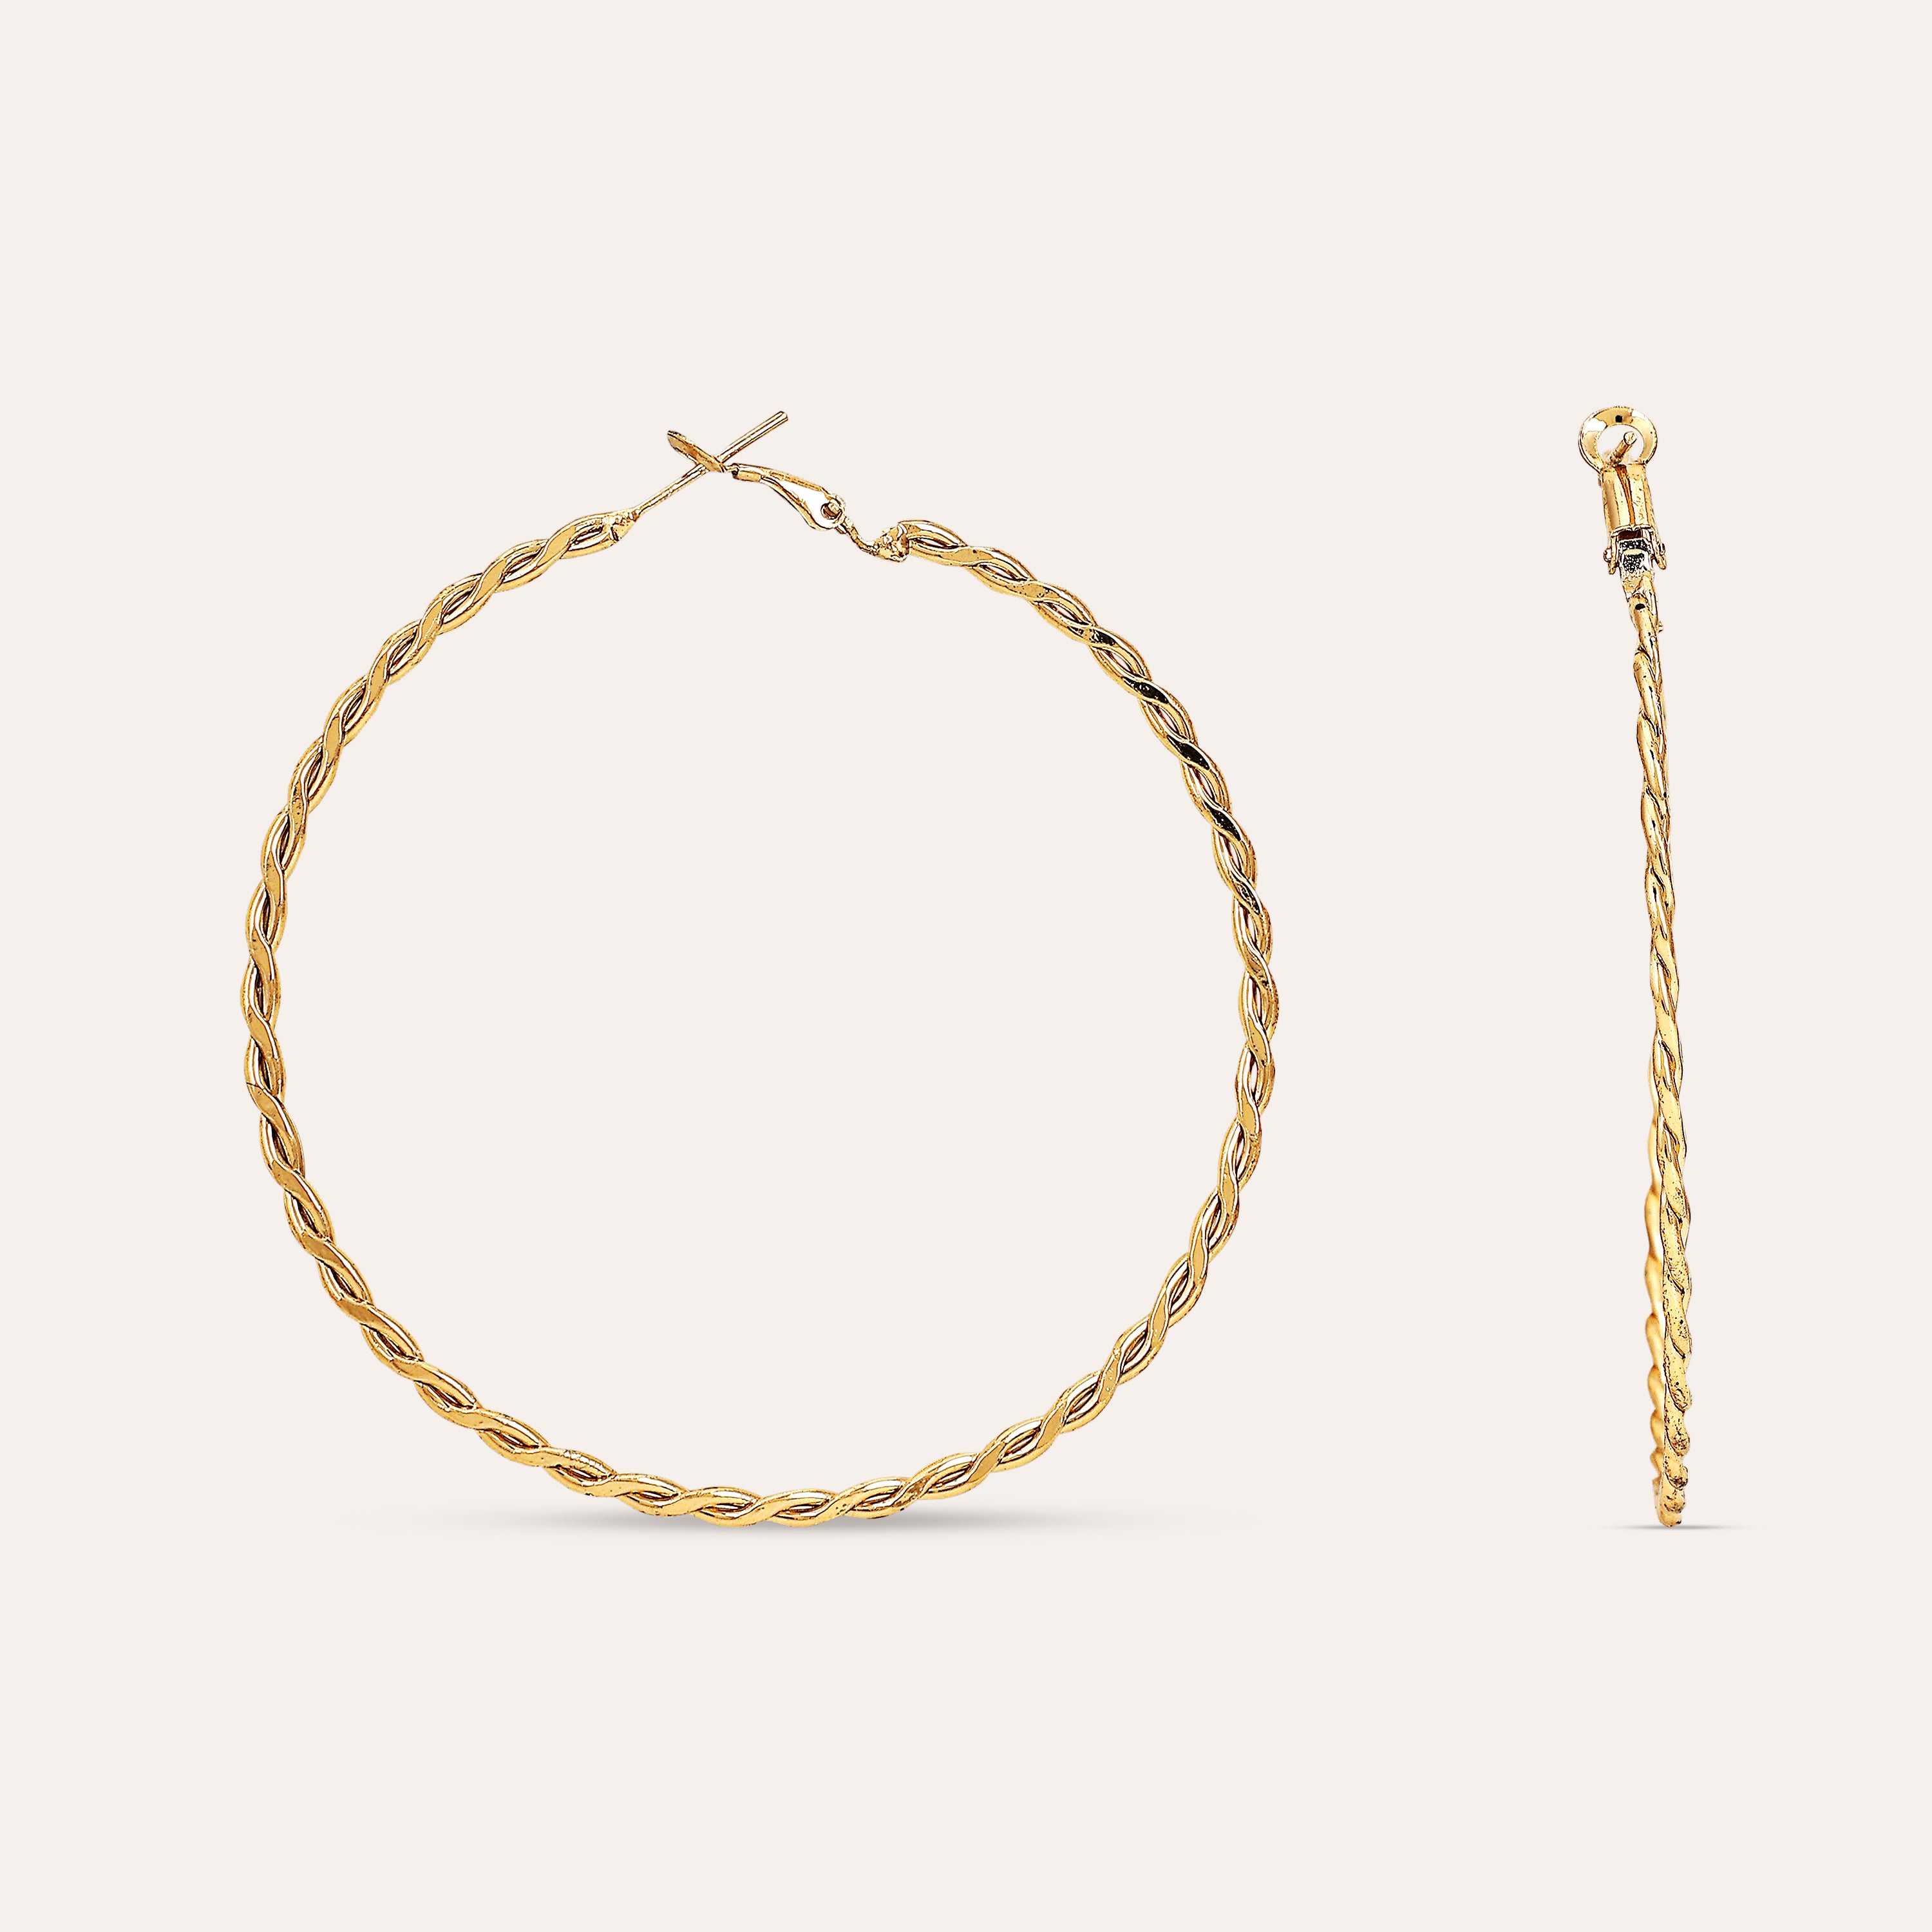 TFC Classic Chunky Gold Plated Hoop Earrings-Discover daily wear gold earrings including stud earrings, hoop earrings, and pearl earrings, perfect as earrings for women and earrings for girls.Find the cheapest fashion jewellery which is anti-tarnish only at The Fun company.